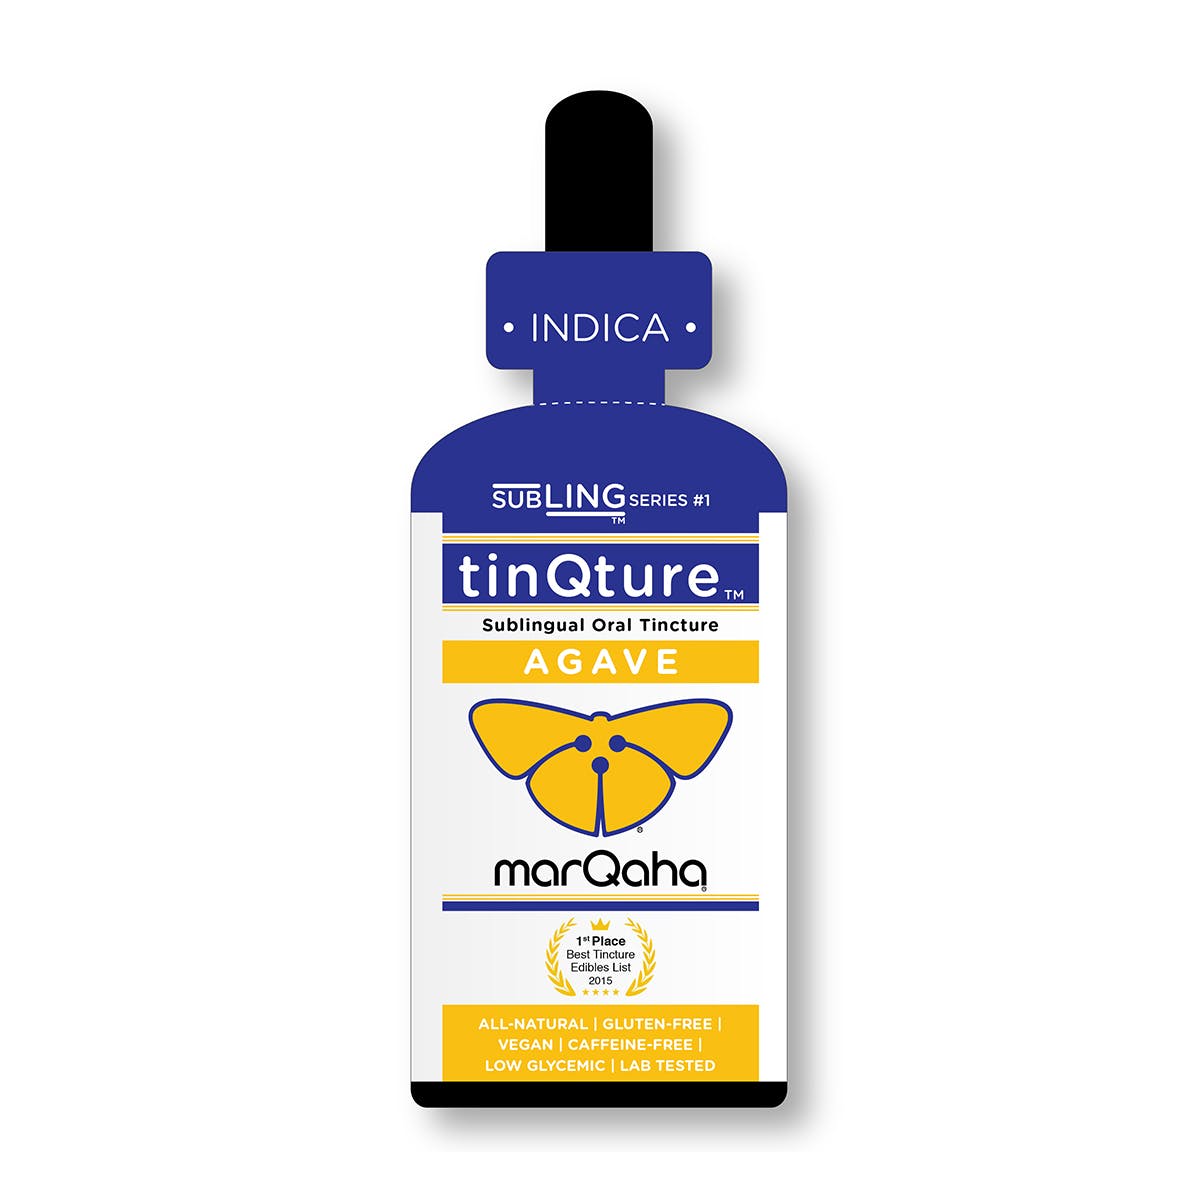 tincture-marqaha-agave-tinqture-indica-med